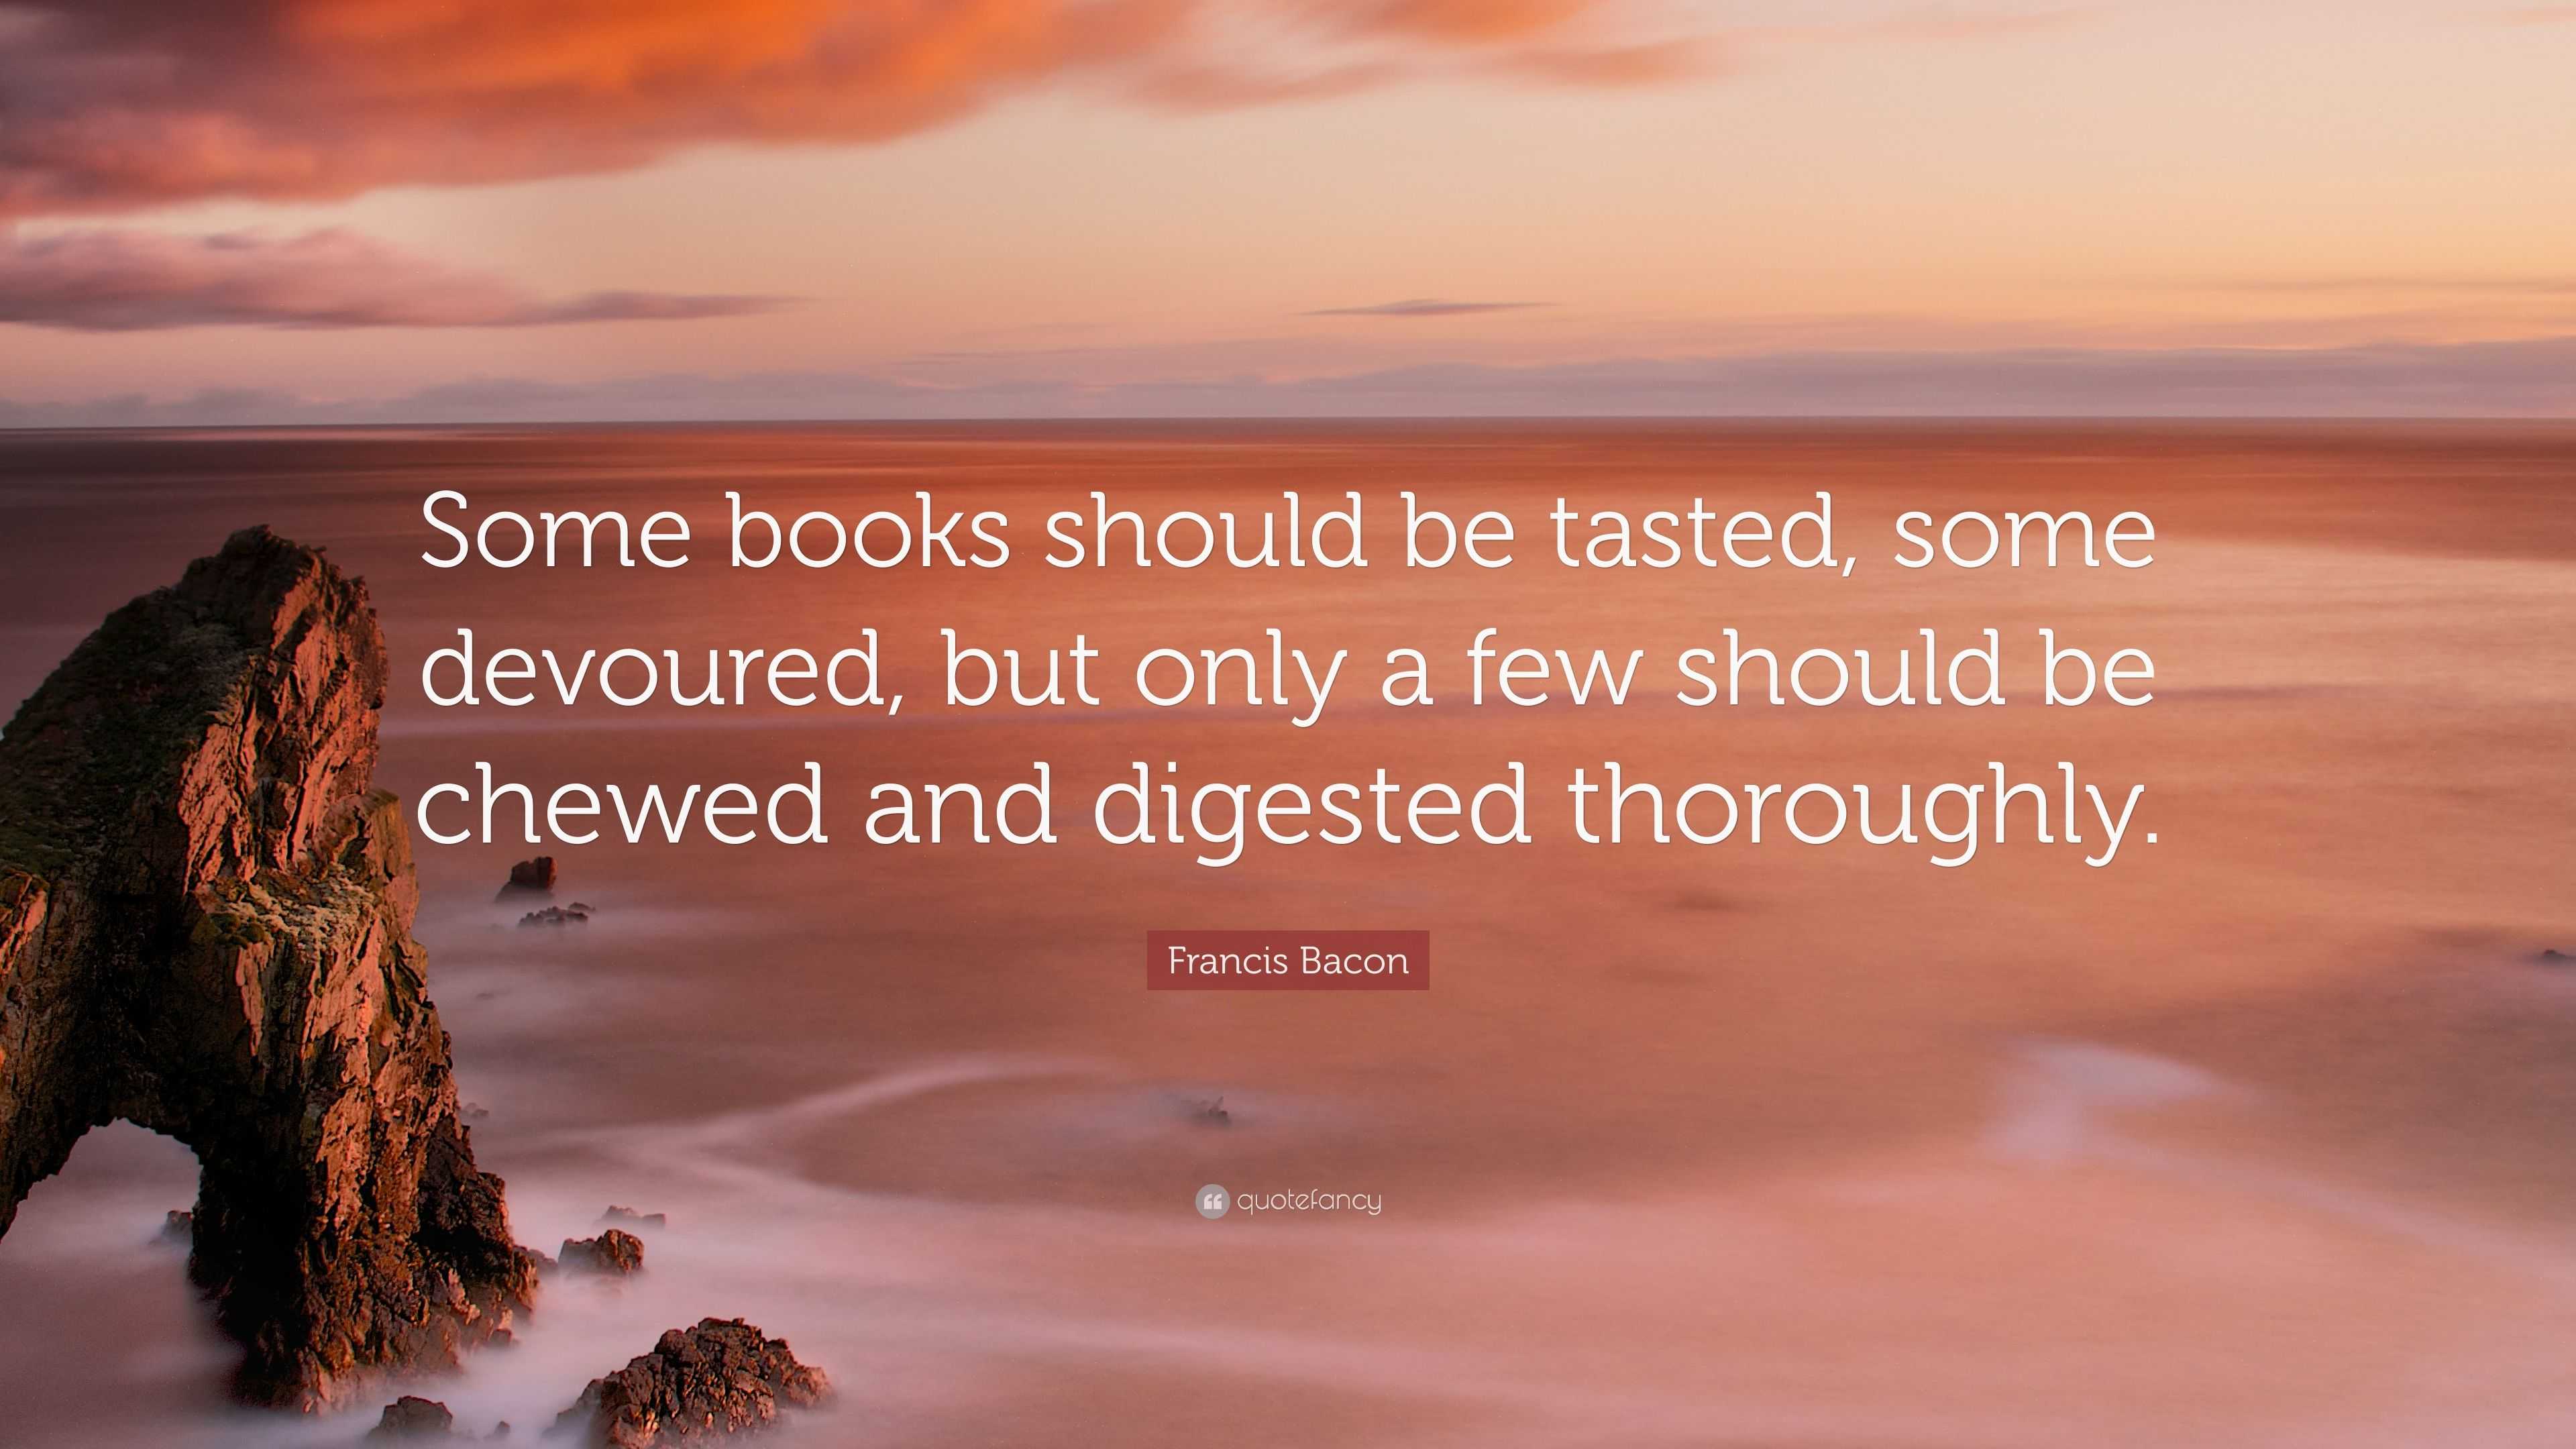 Francis Bacon Quote: “Some books should be tasted, some devoured, but ...